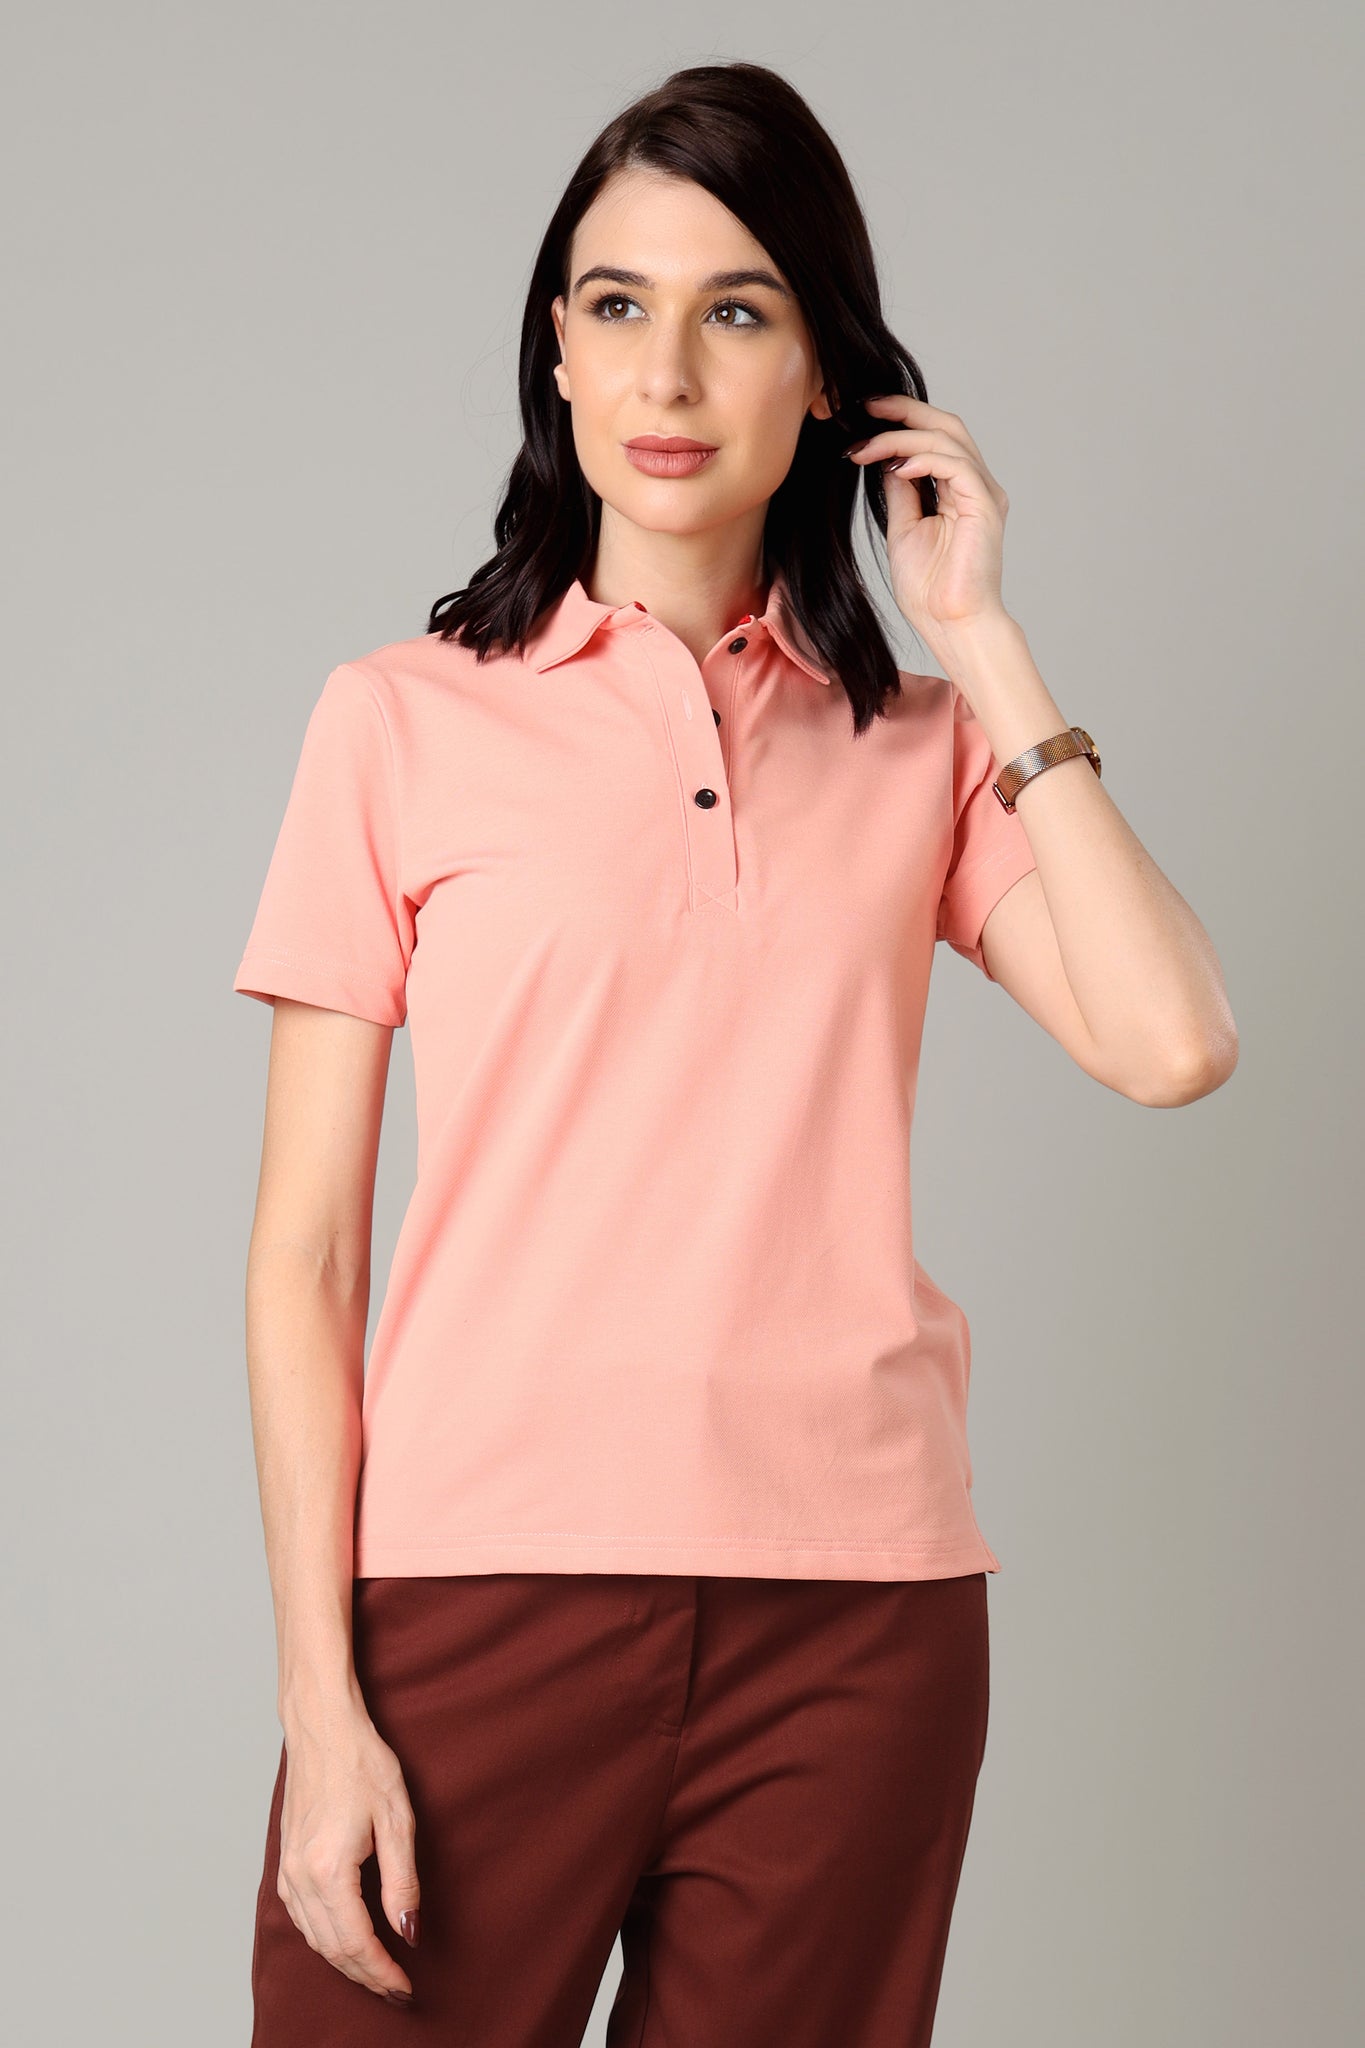 Exclusive Rose Pink Polo T-Shirt For Women